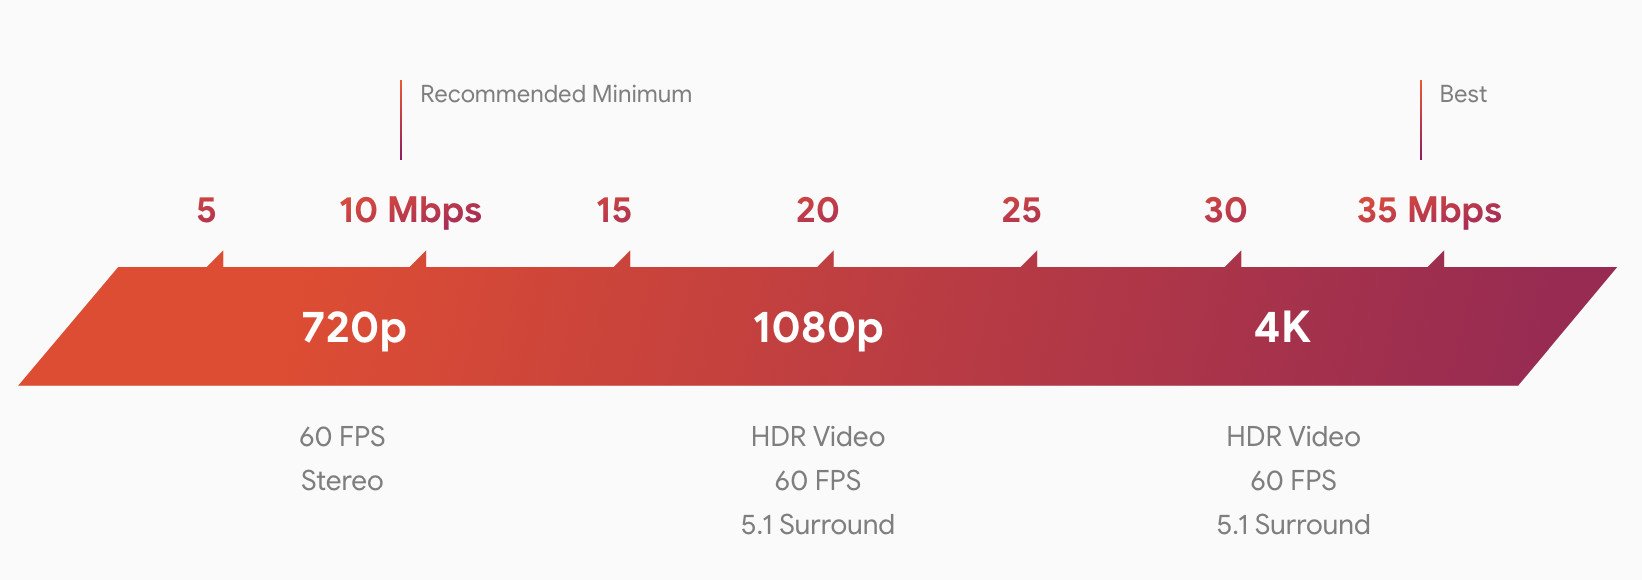 The internet speeds that Google recommends for using Stadia